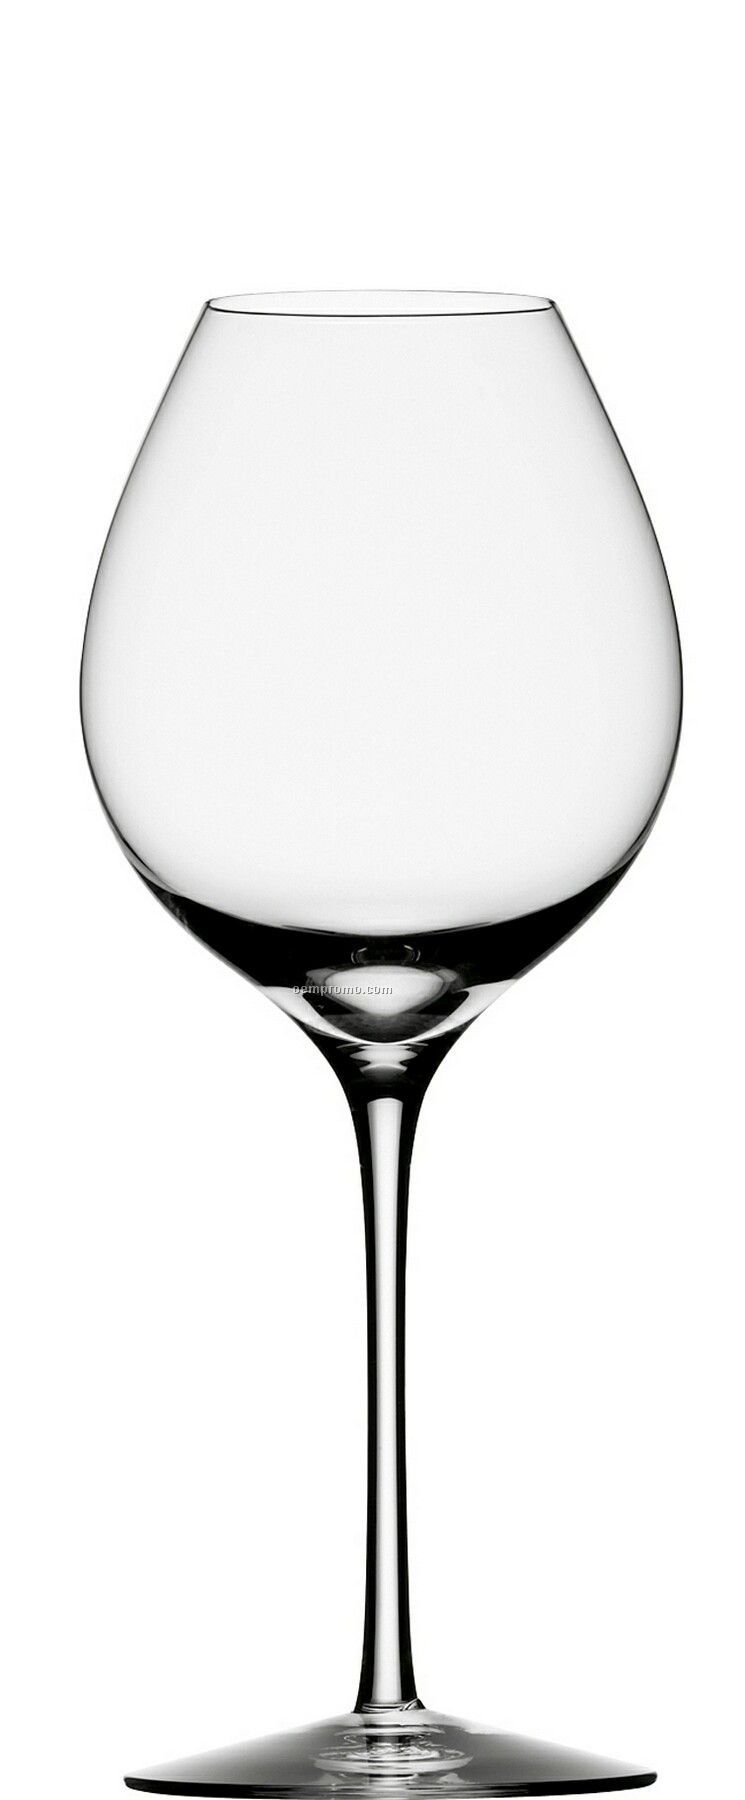 Difference "Fruit" Crystal Wine Glass W/ Flavor Enhance Design